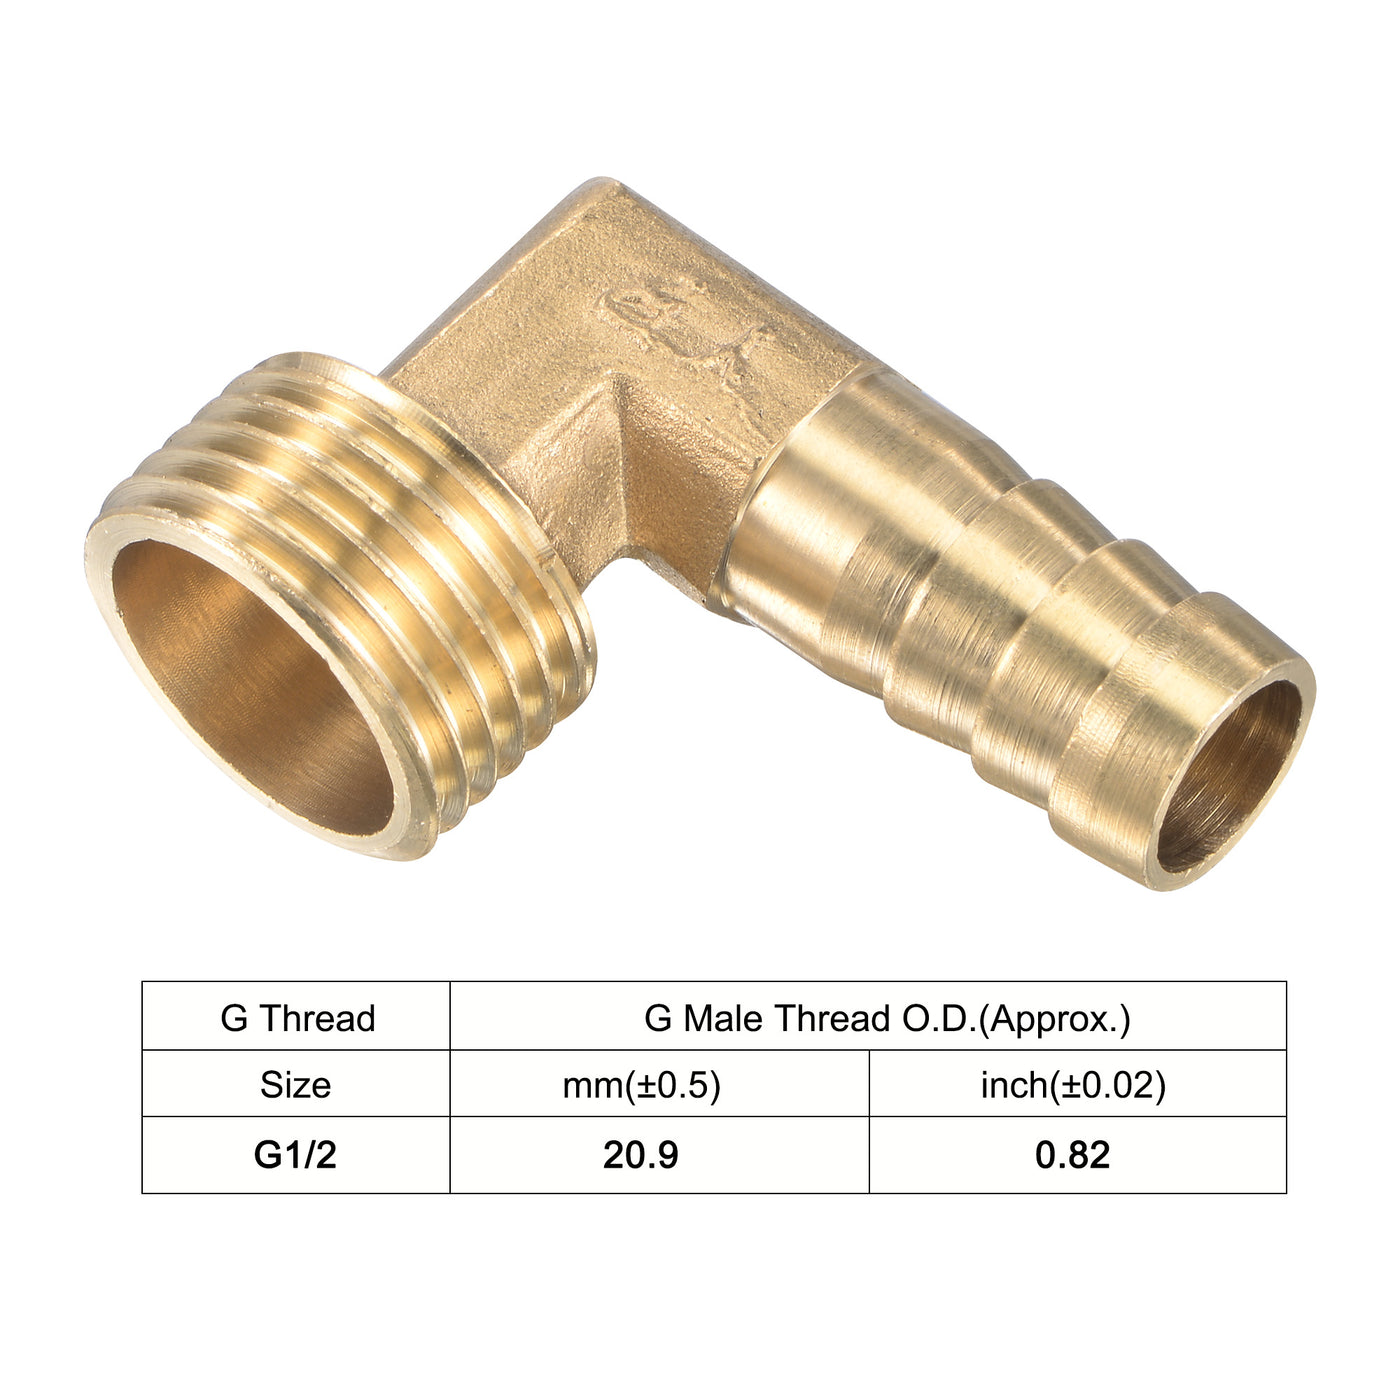 Uxcell Uxcell Brass Hose Barb Fitting Elbow 12mm x G1/2 Male Thread Right Angle Pipe Connector with Stainless Steel Hose Clamp, Pack of 2